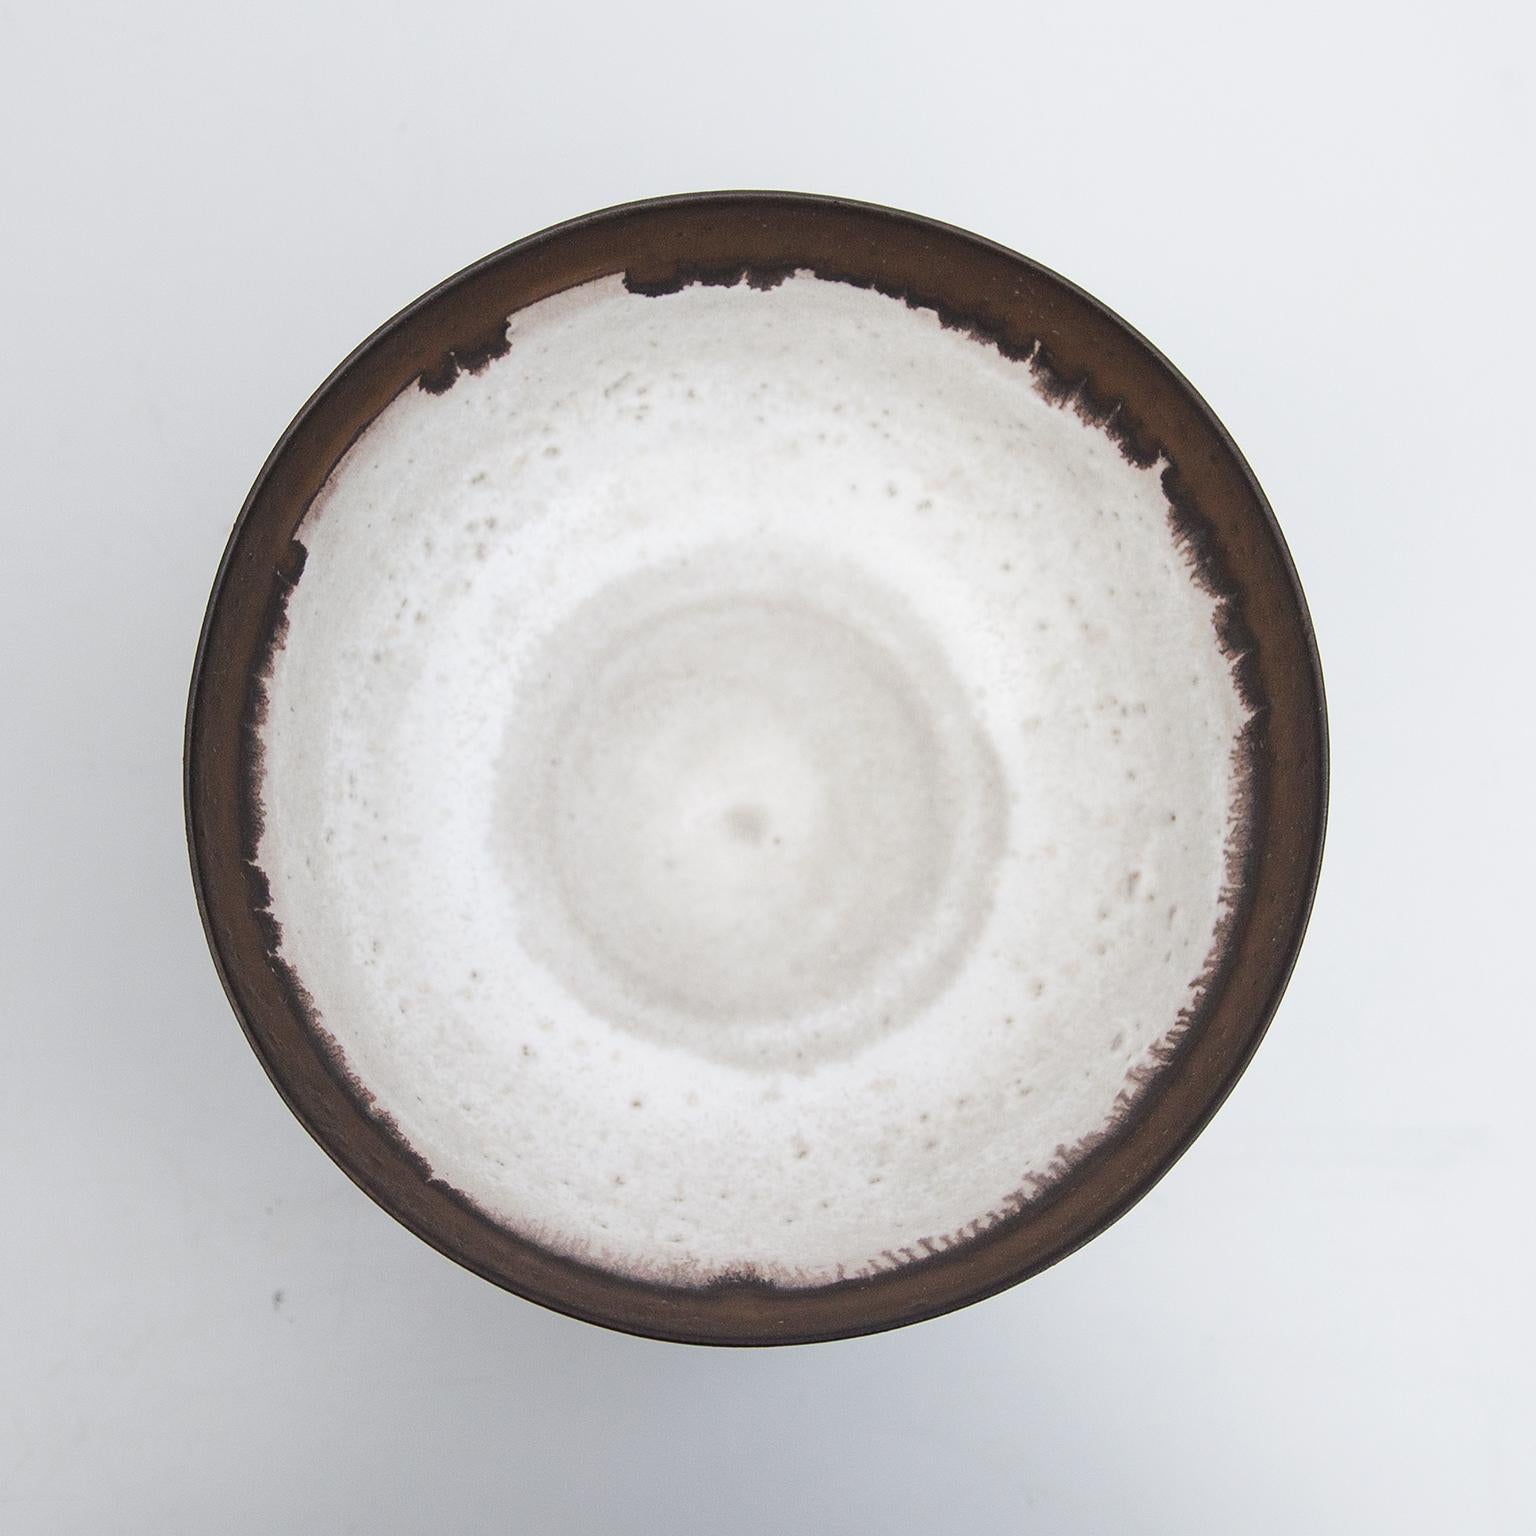 English Lucie Rie Manganeze Rim Bowl 1980 For Sale